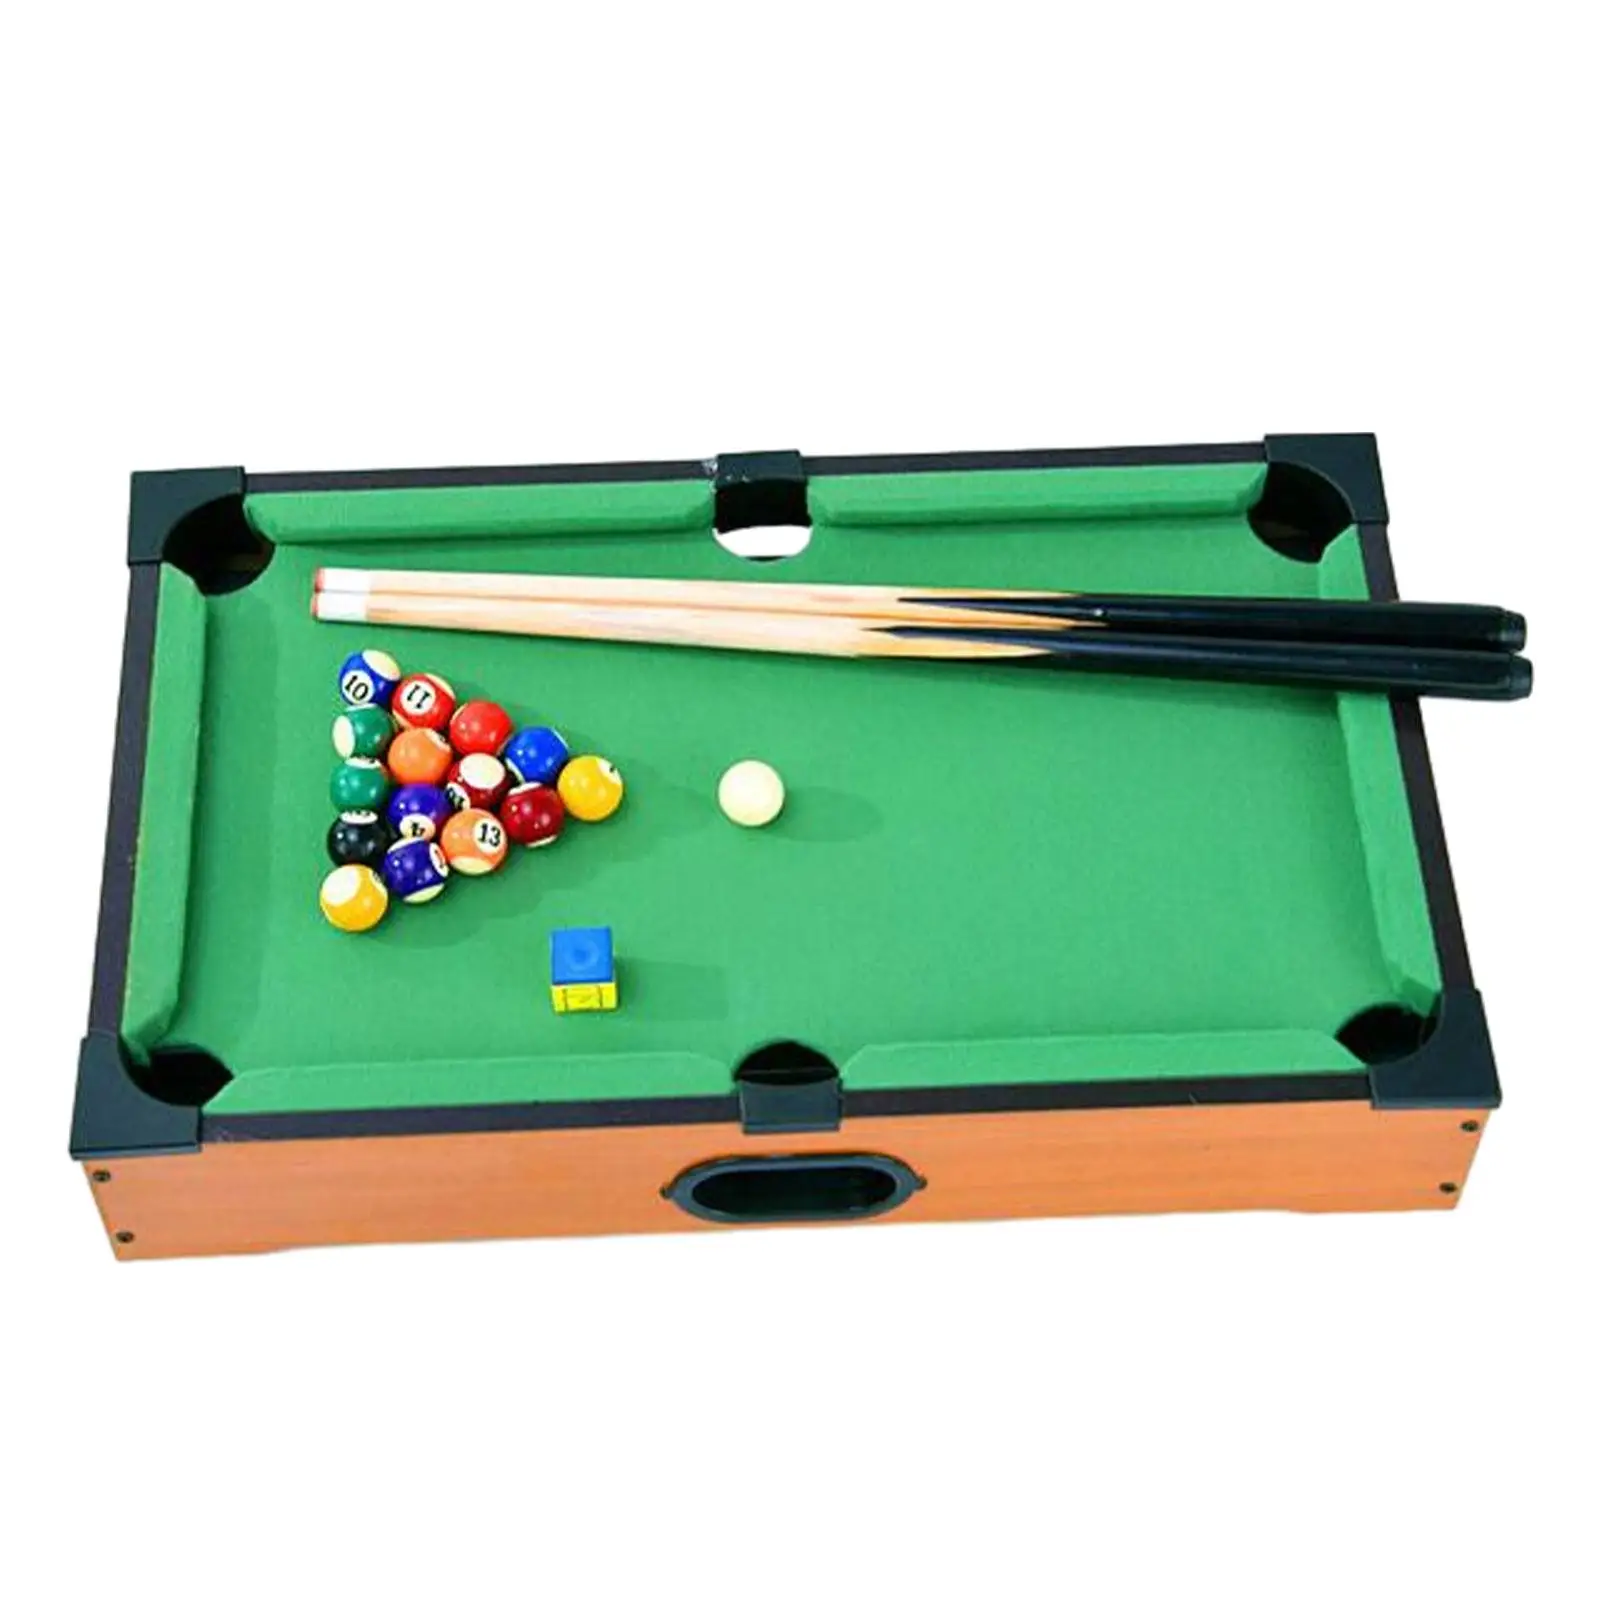 Table Billiards Toy Eye Hand Coordination Cues Home Play Snooker Wood for Playhouse Game Room Party Desktop Family